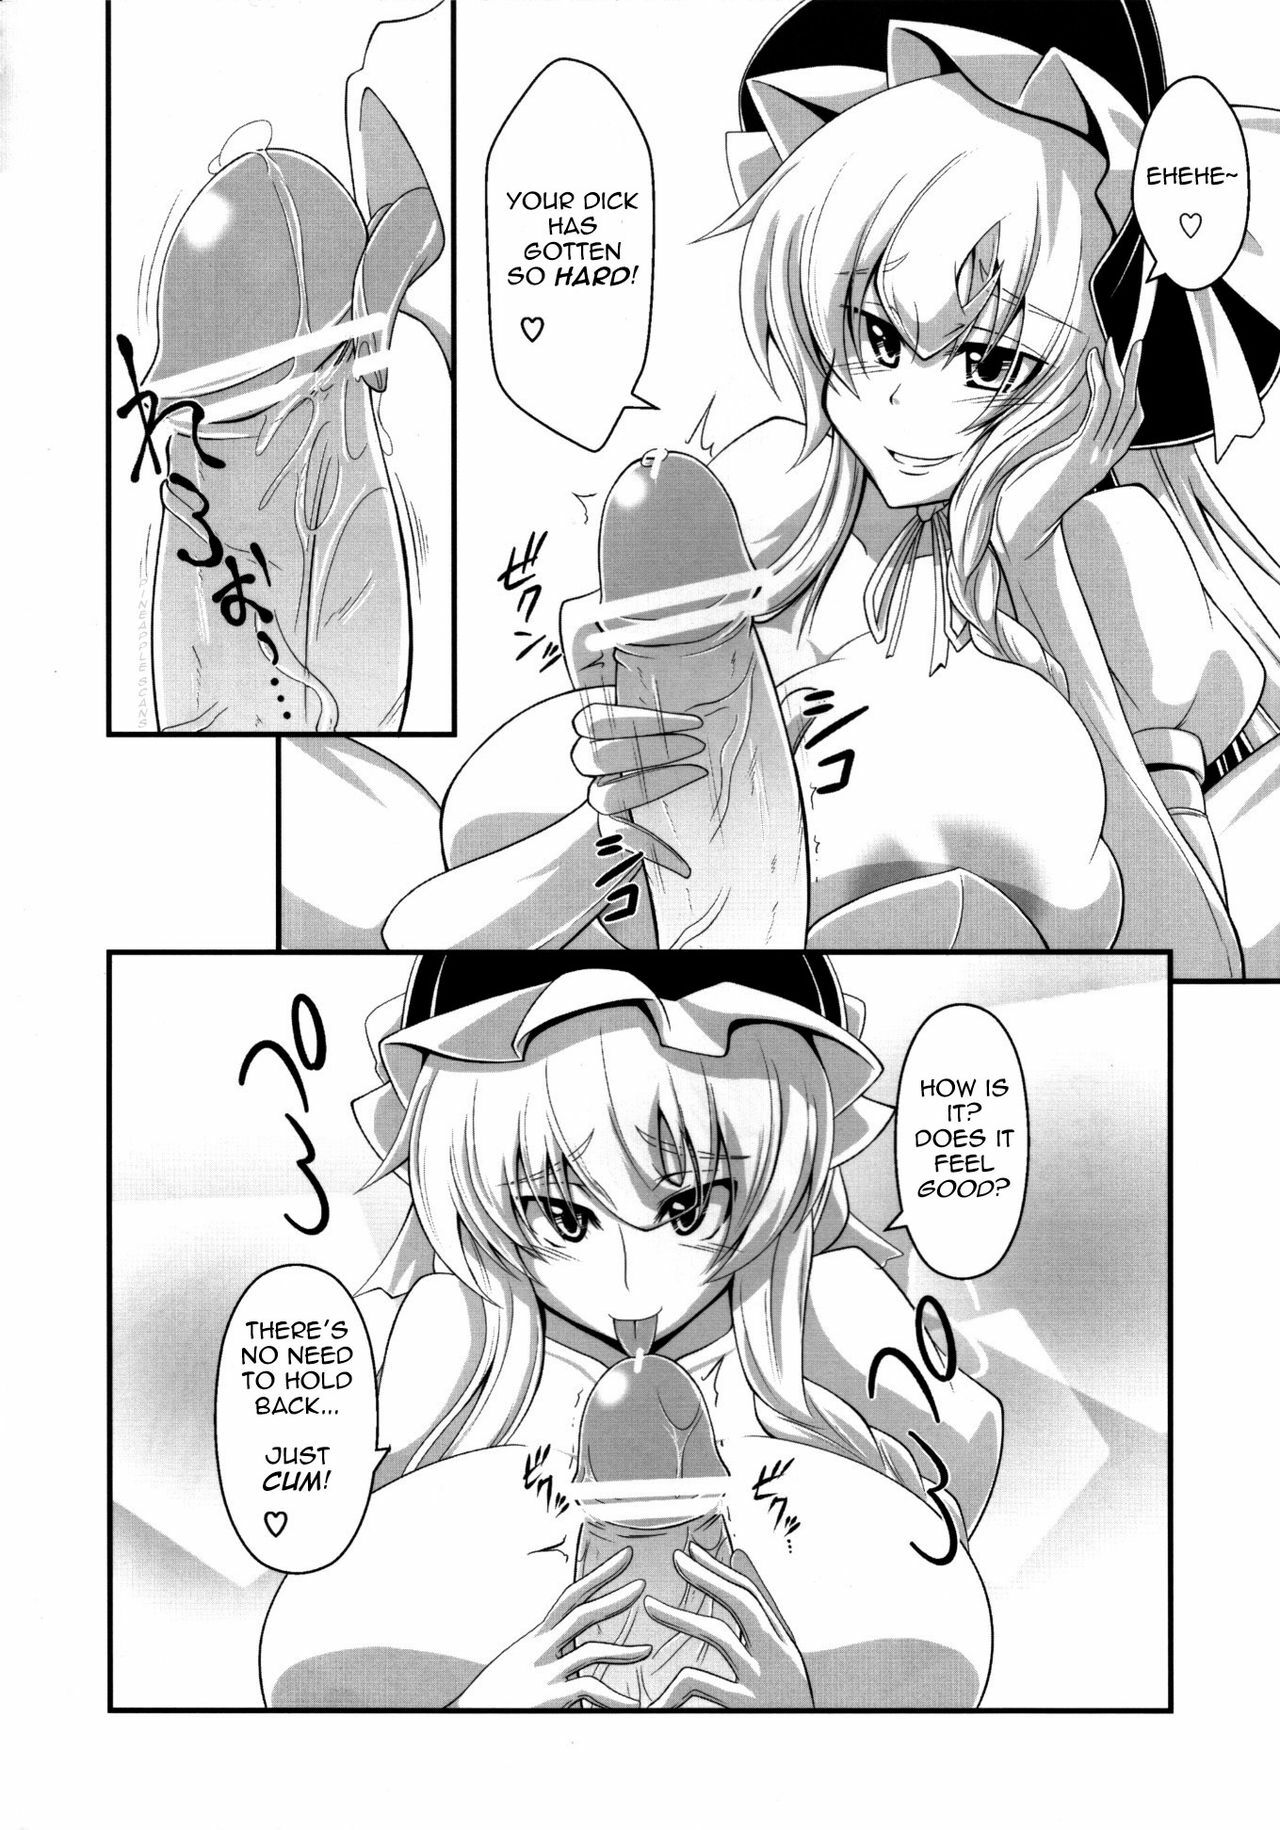 (Kouroumu 6) [Forever and ever... (Eisen)] GLAMOROUS MARISA (Touhou Project) [English] =Pineapples r Us= page 4 full